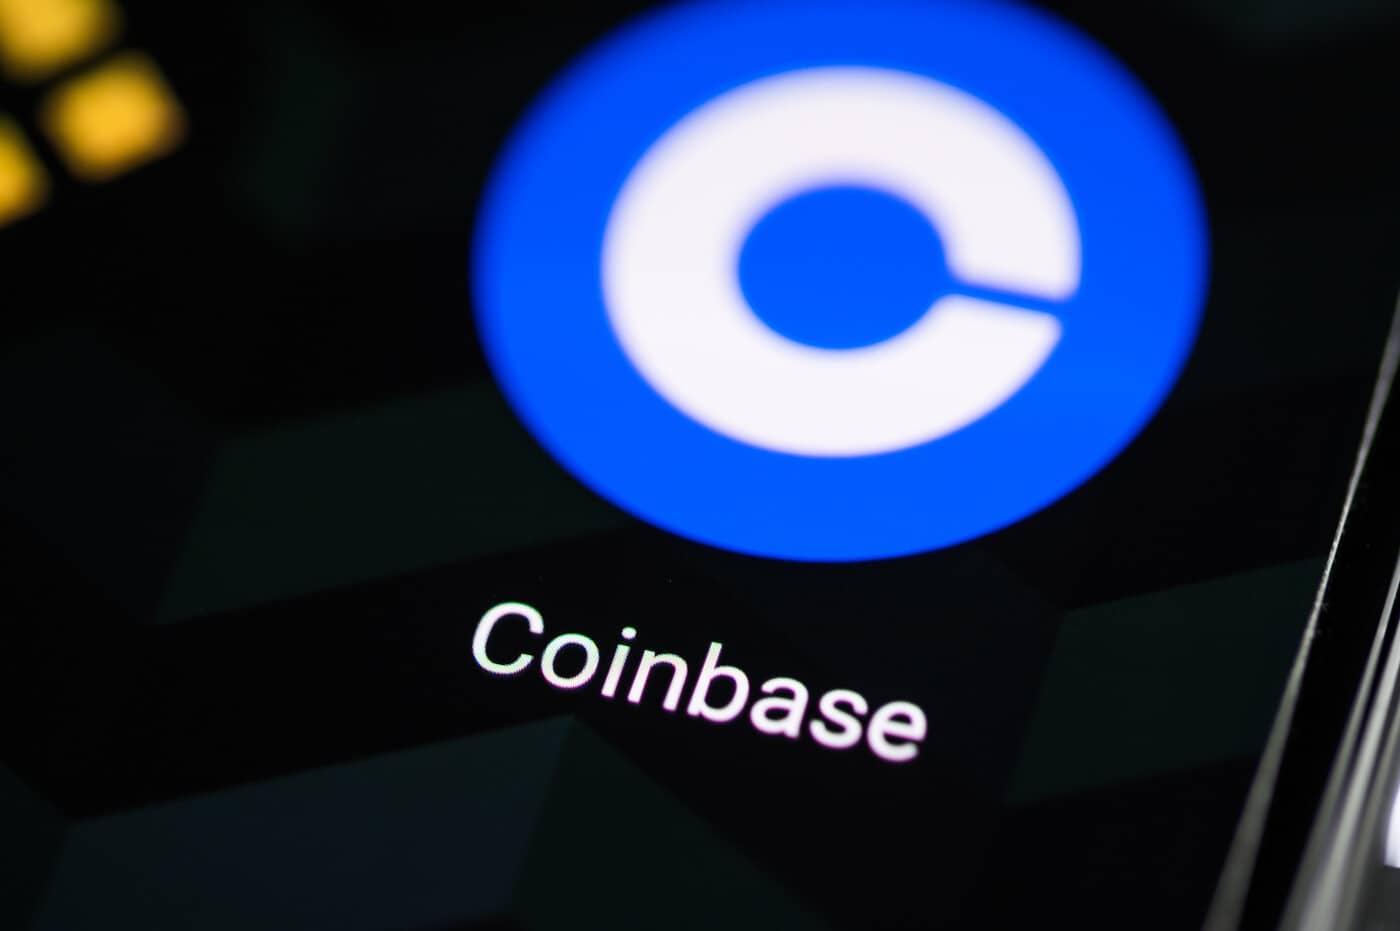 SEC Asks Judge To Deny Coinbase’s Motion To Dismiss Lawsuit